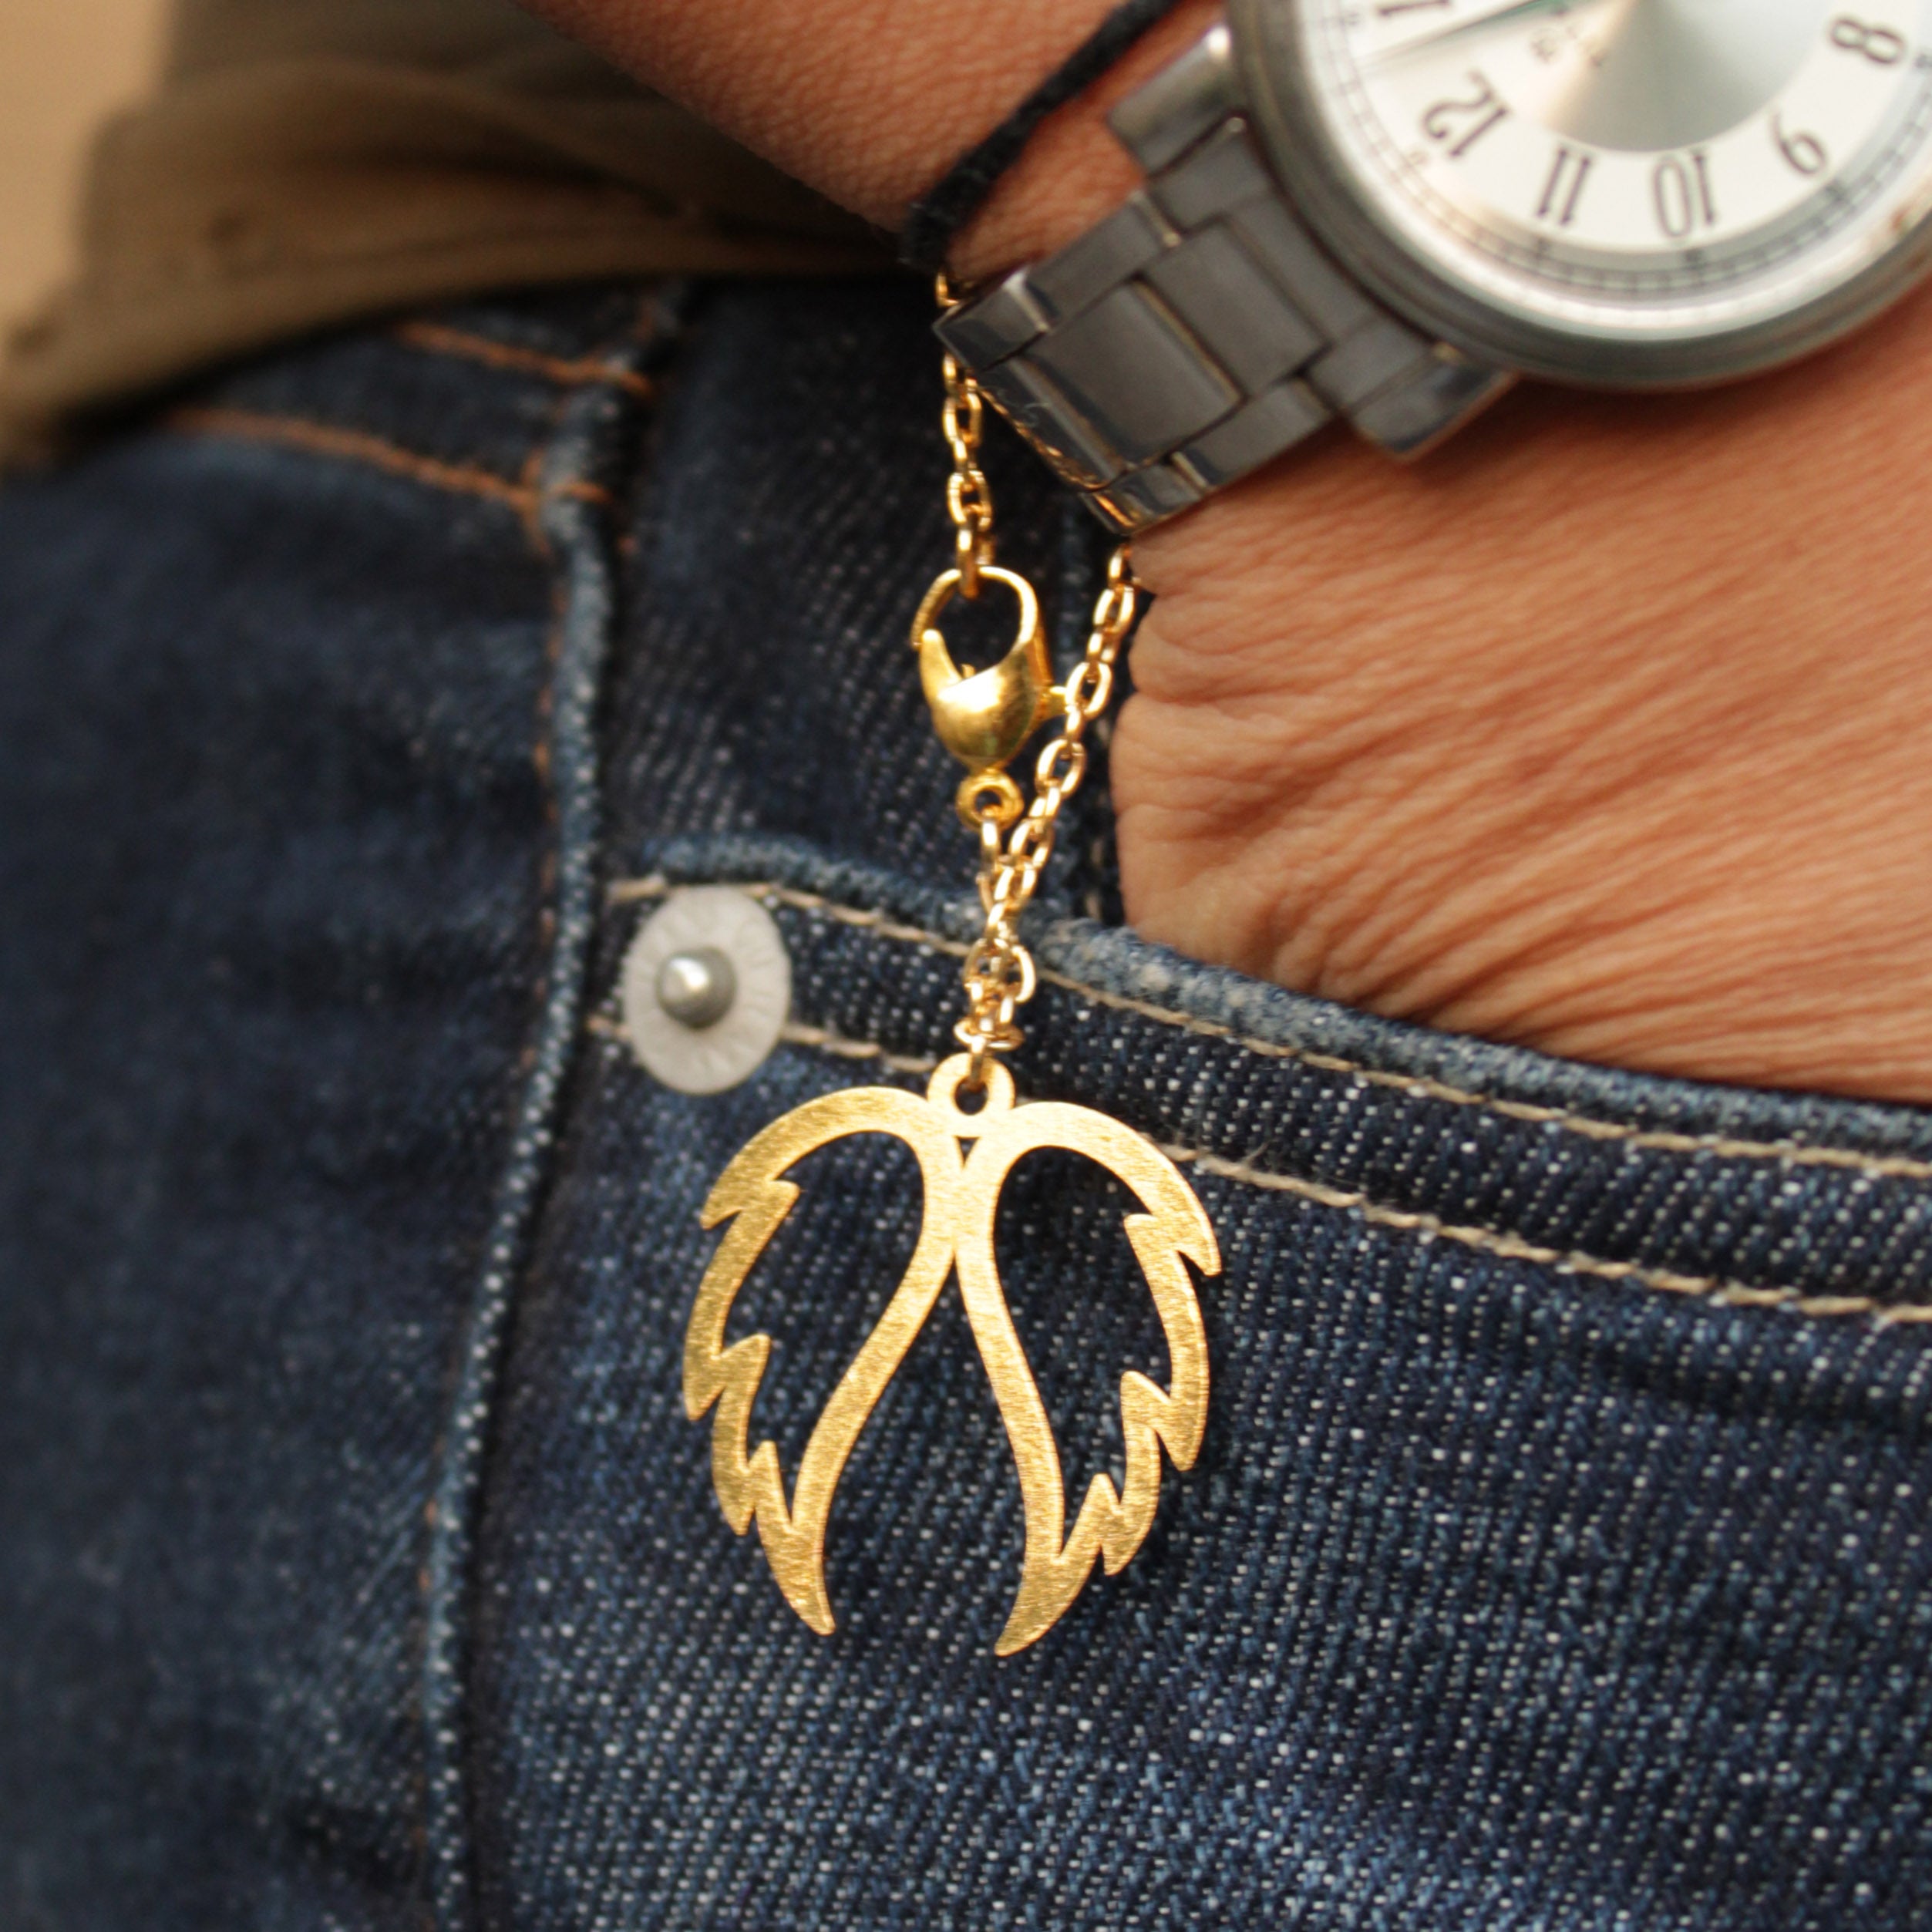 laser cut mild steel watch charm Beabhika Gold Watch Charm Golden Bag Charm Angel Wings Women Jewelry Accessory Watch Attachment Online Cash On Delivery Key Chain Charm